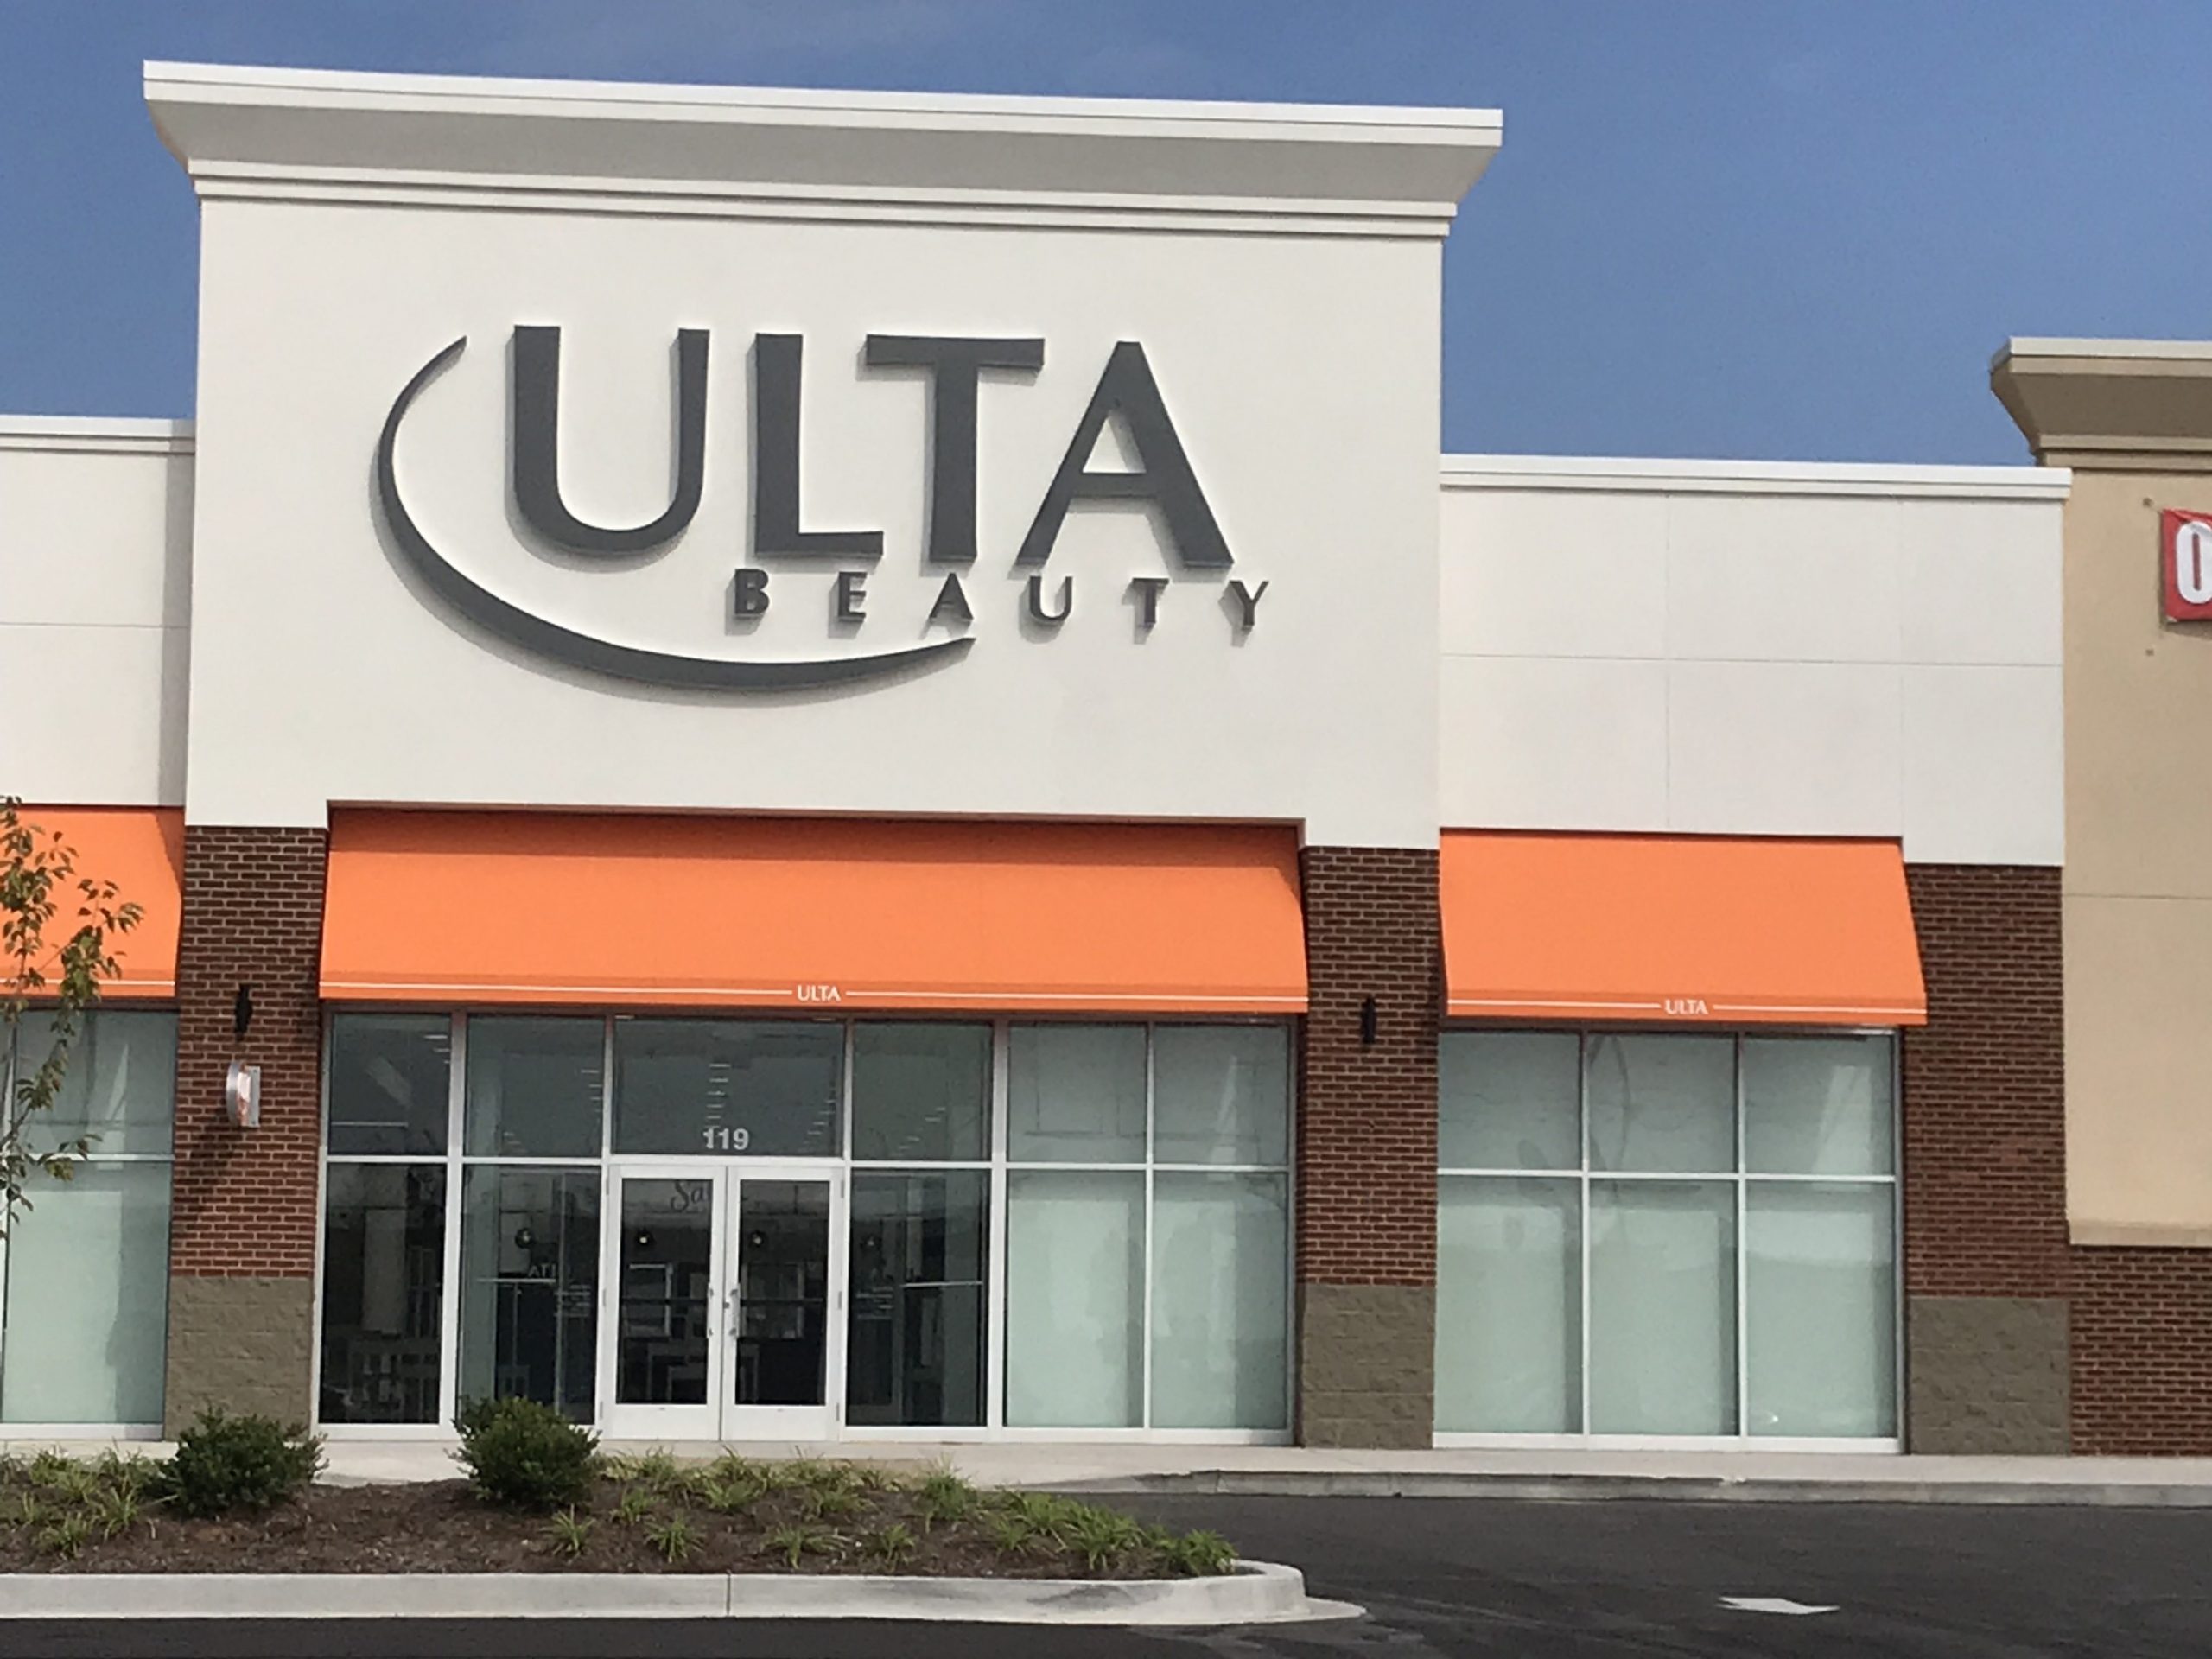 Sephora vs. Ulta: A Competitive Analysis Between the Top Two Beauty